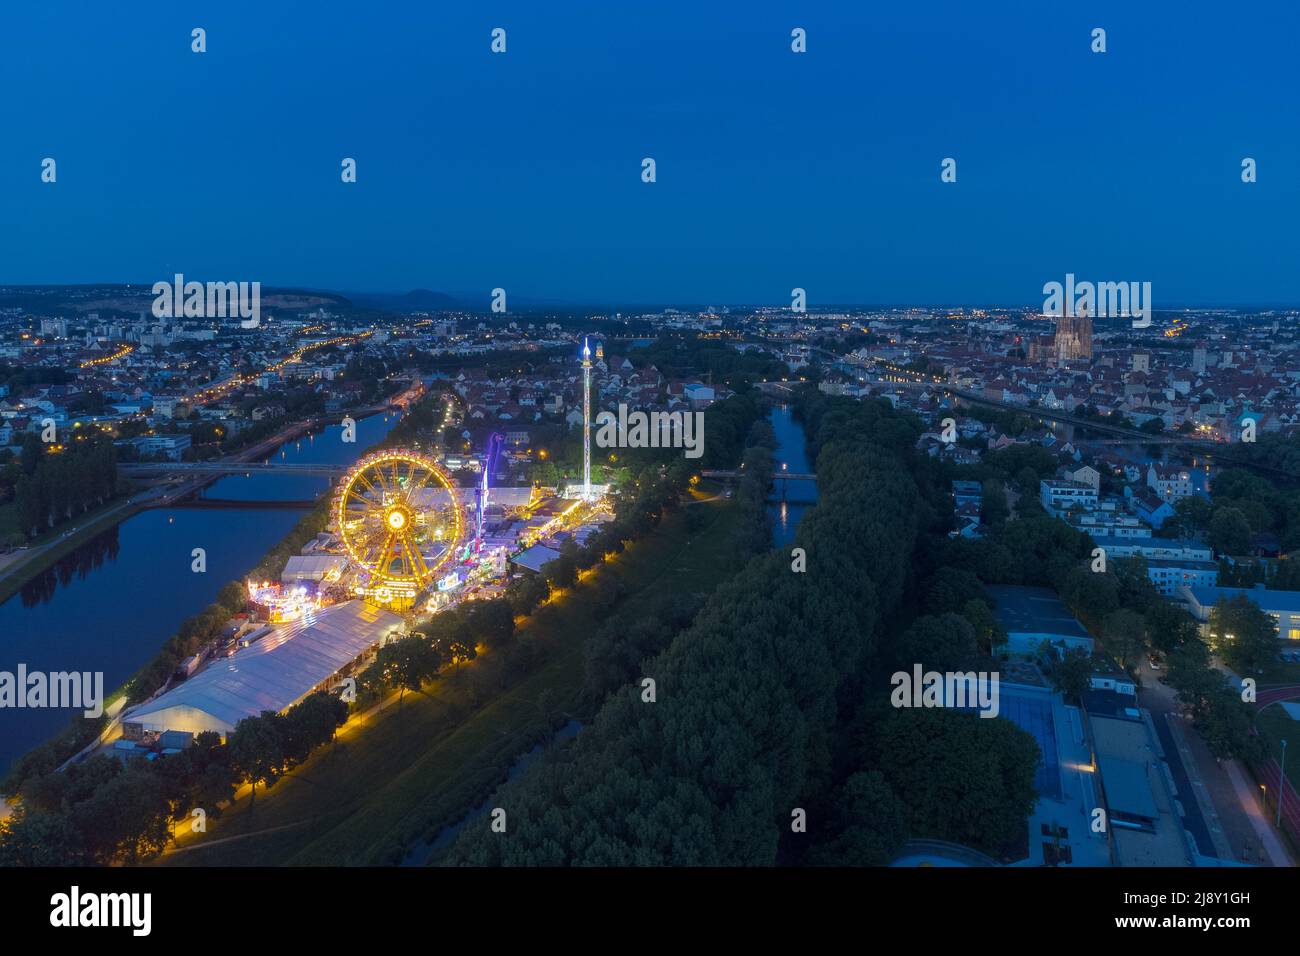 Aerial drone view of the fair Maidult in Regensburg, Bavaria, Germany with ferris wheel and beer tents at night Stock Photo